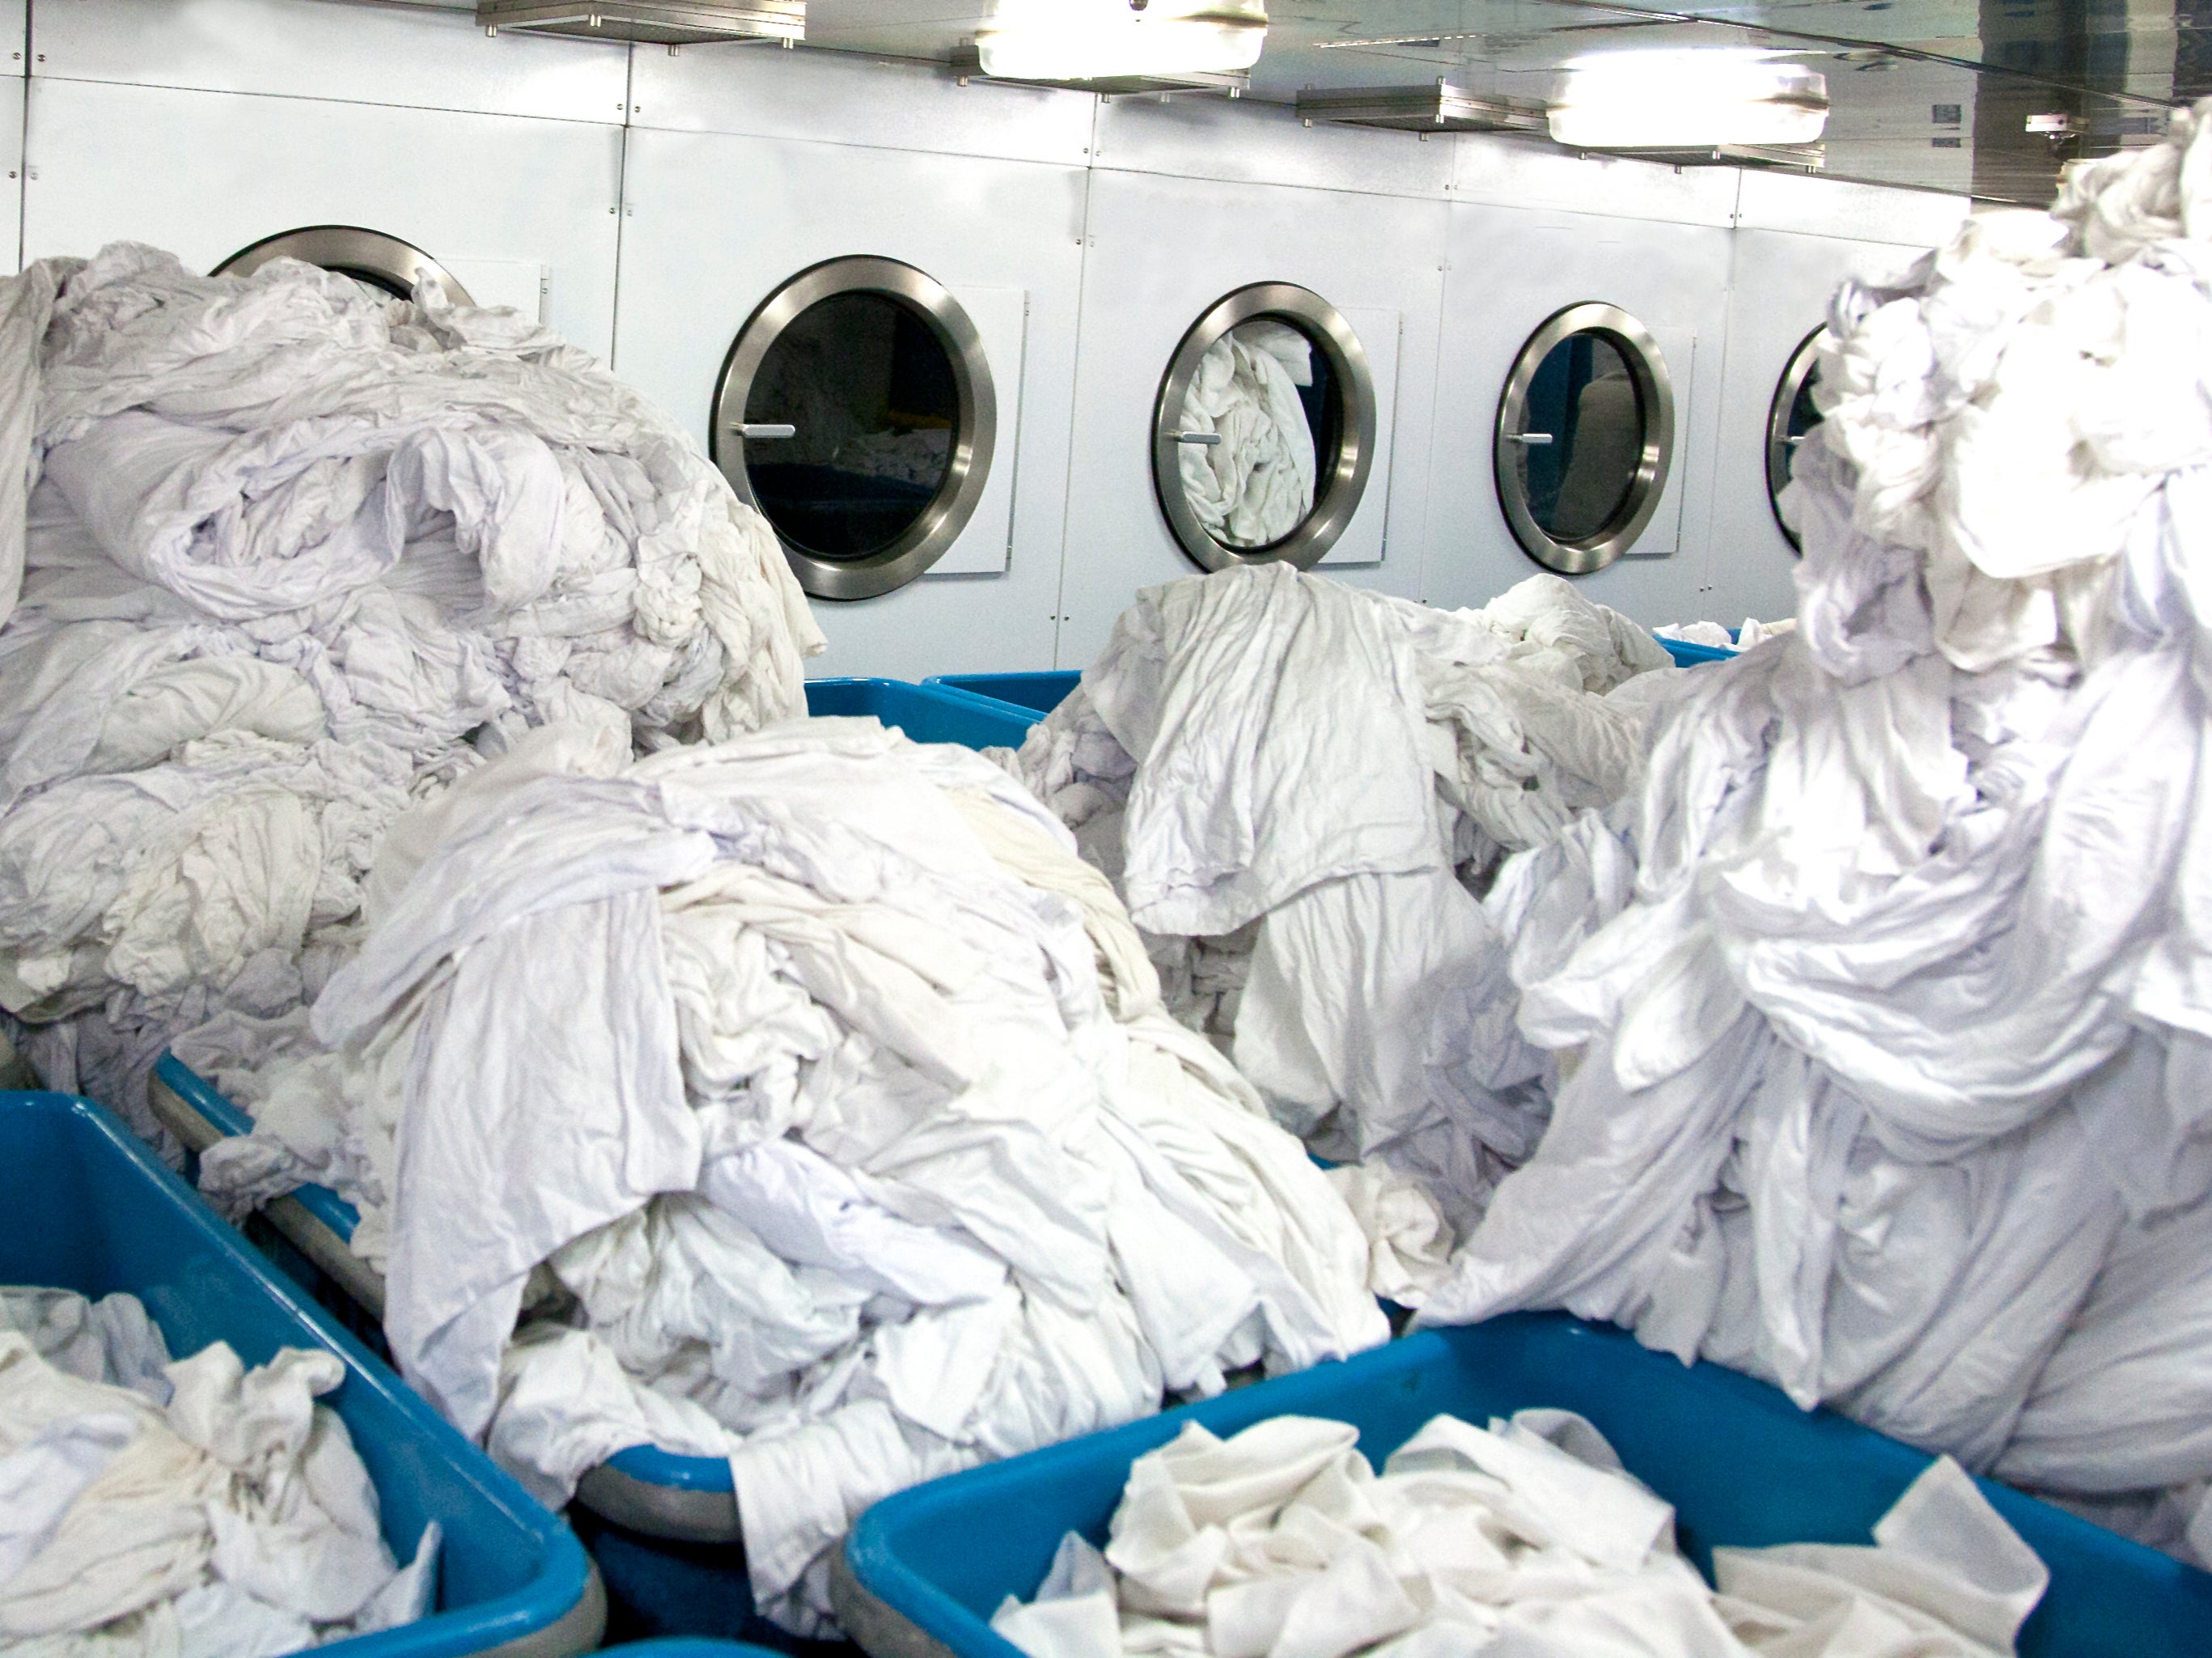 Mountains of sheets about to go into drying machines. Up to 40 times more microscopic fragments were generated by dryers than washing machines, scientists found in tests